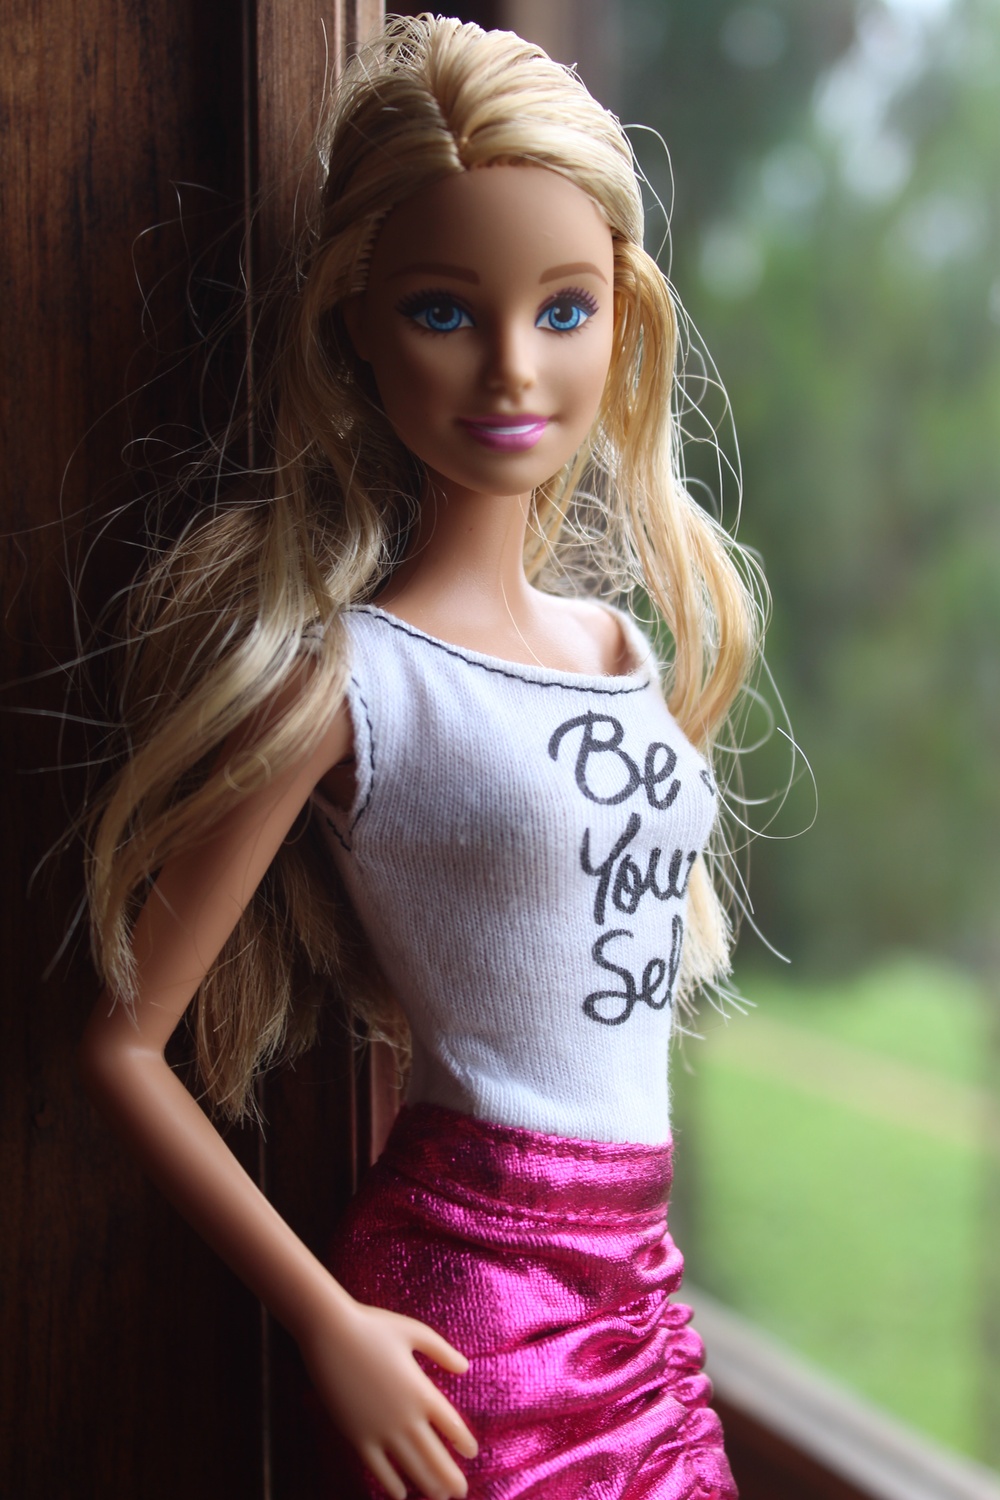 Barbie doll with white top and pink skirt looking into the camera